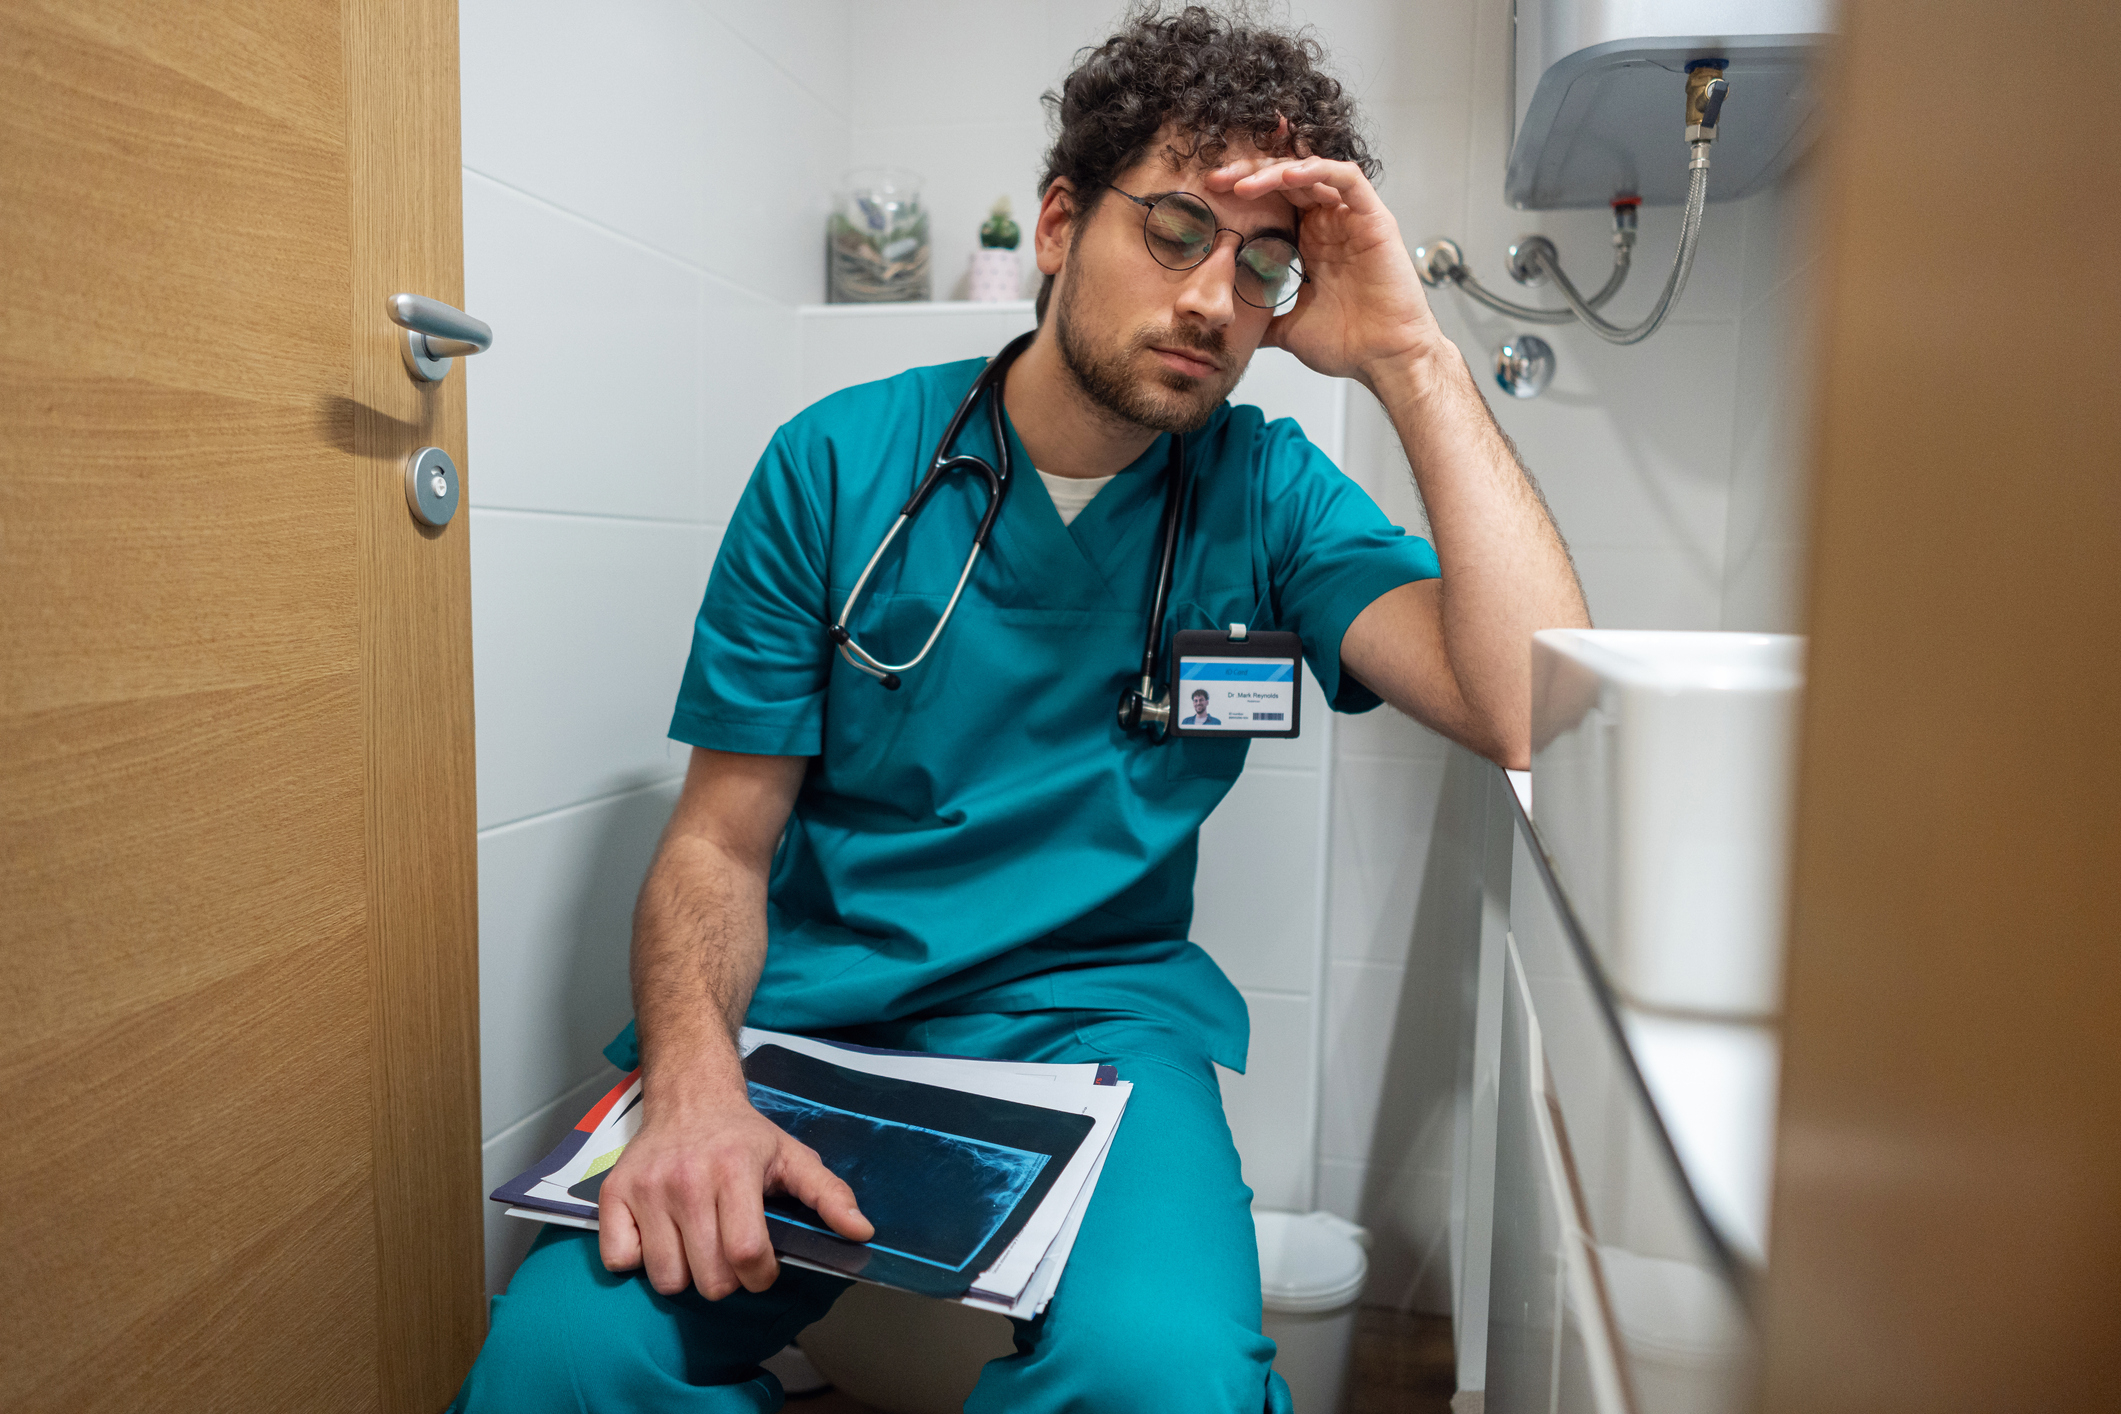 A tired doctor in scrubs holding medical files sits with his head resting on his hand in a small room, which appears to be a restroom